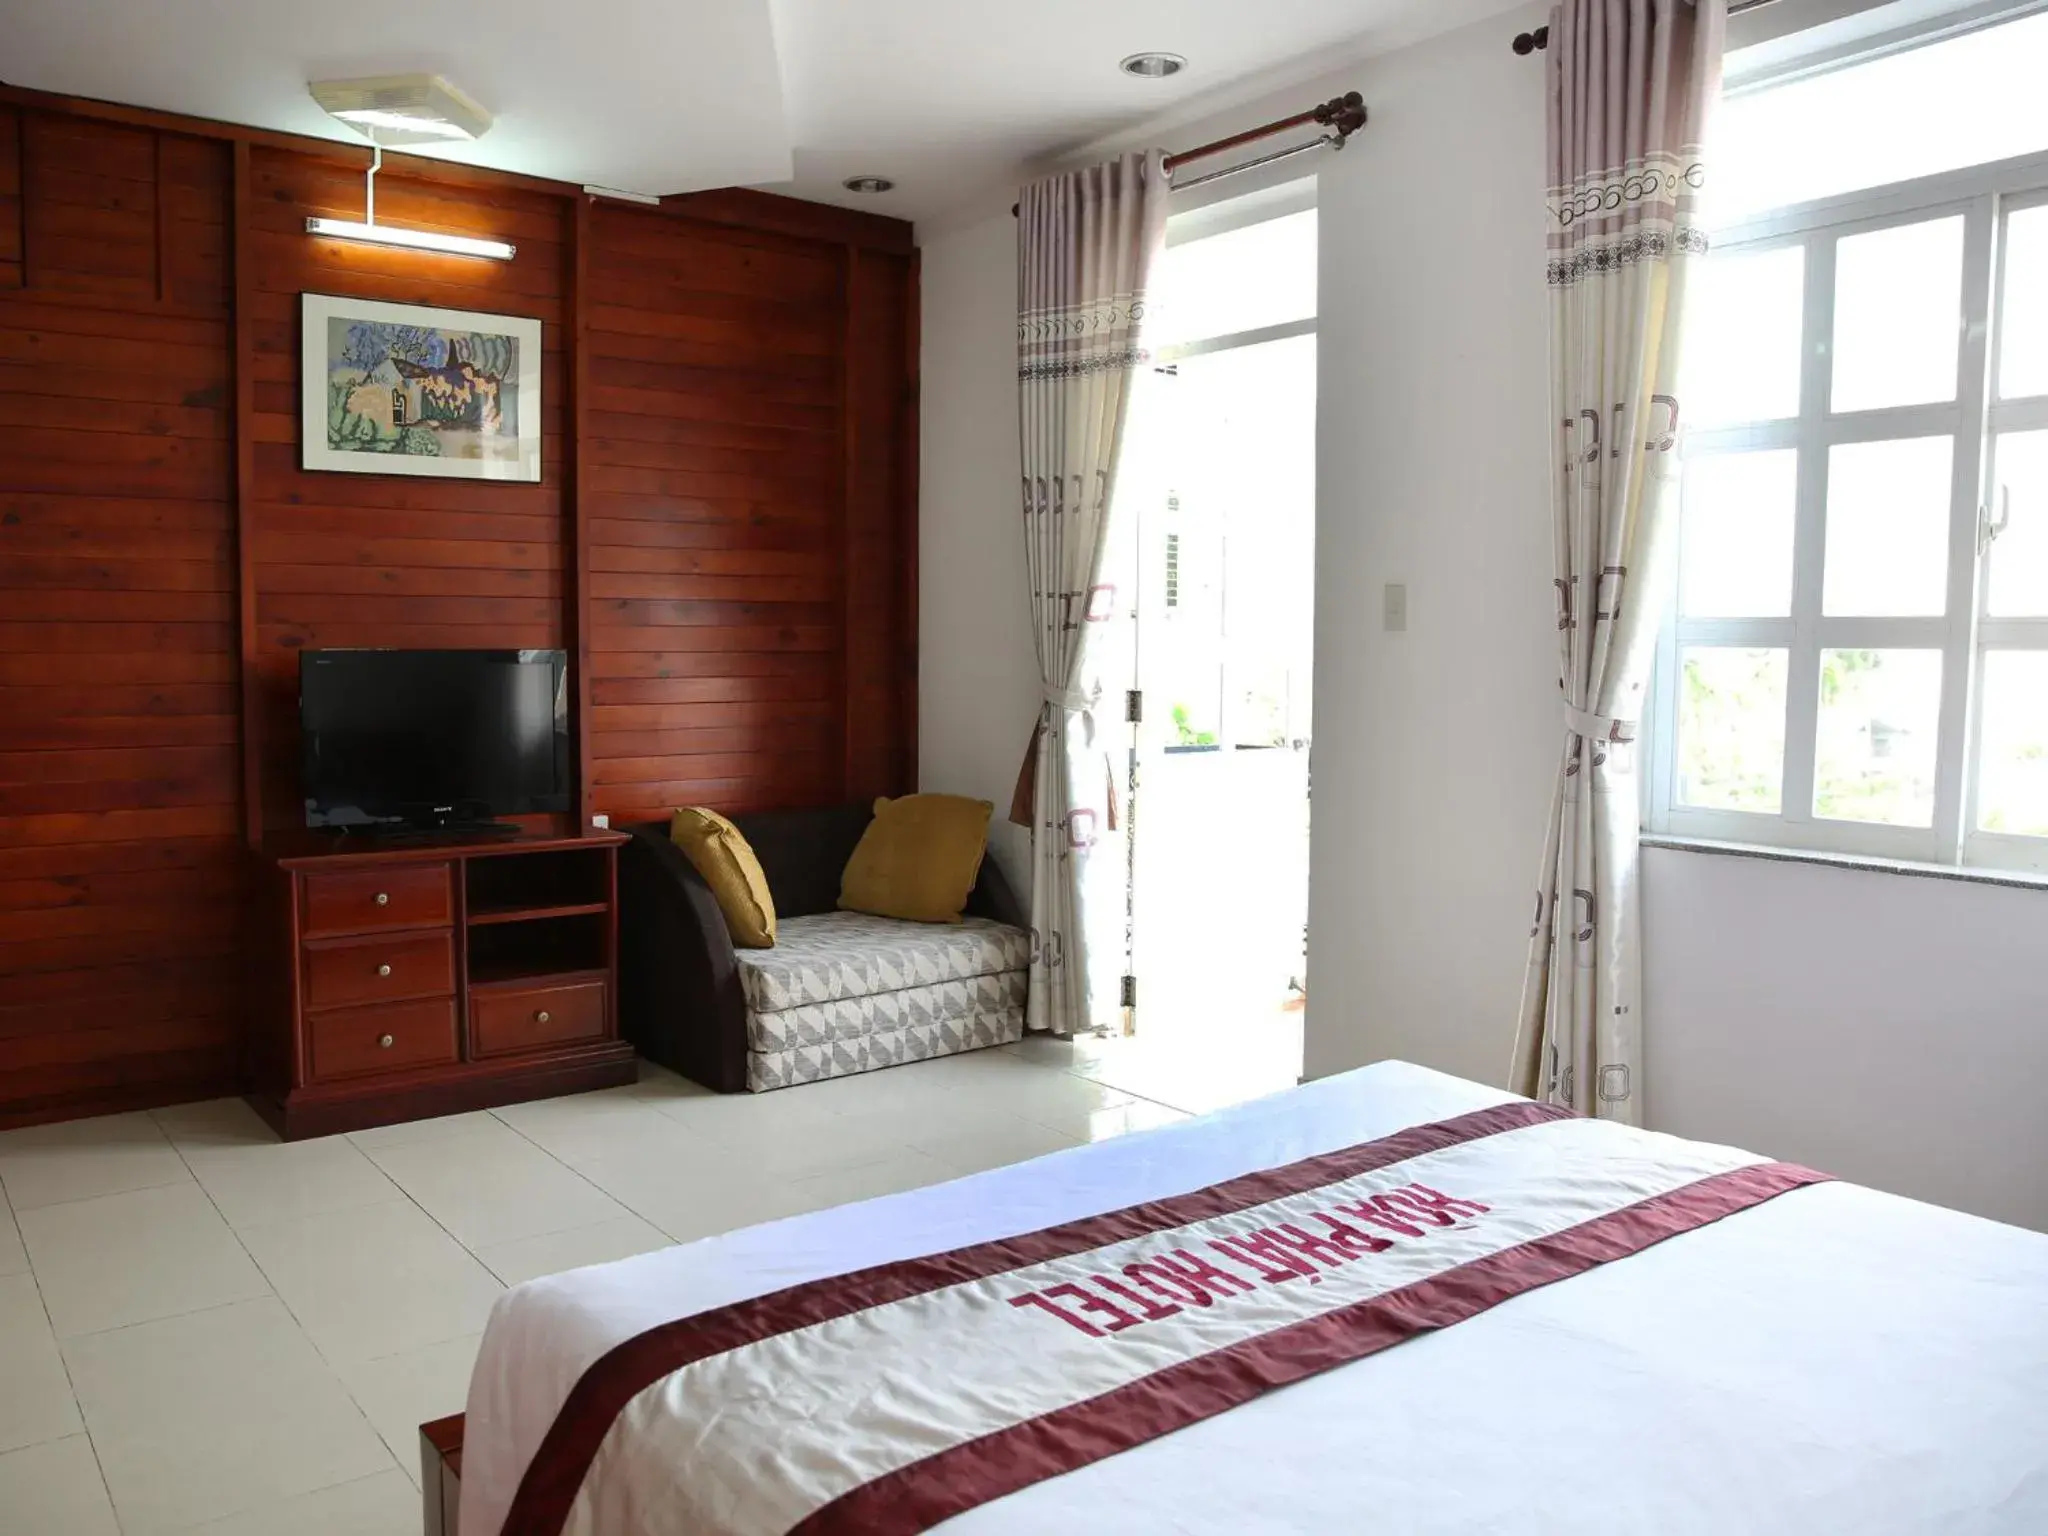 Day, Room Photo in Hoa Phat Hotel & Apartment